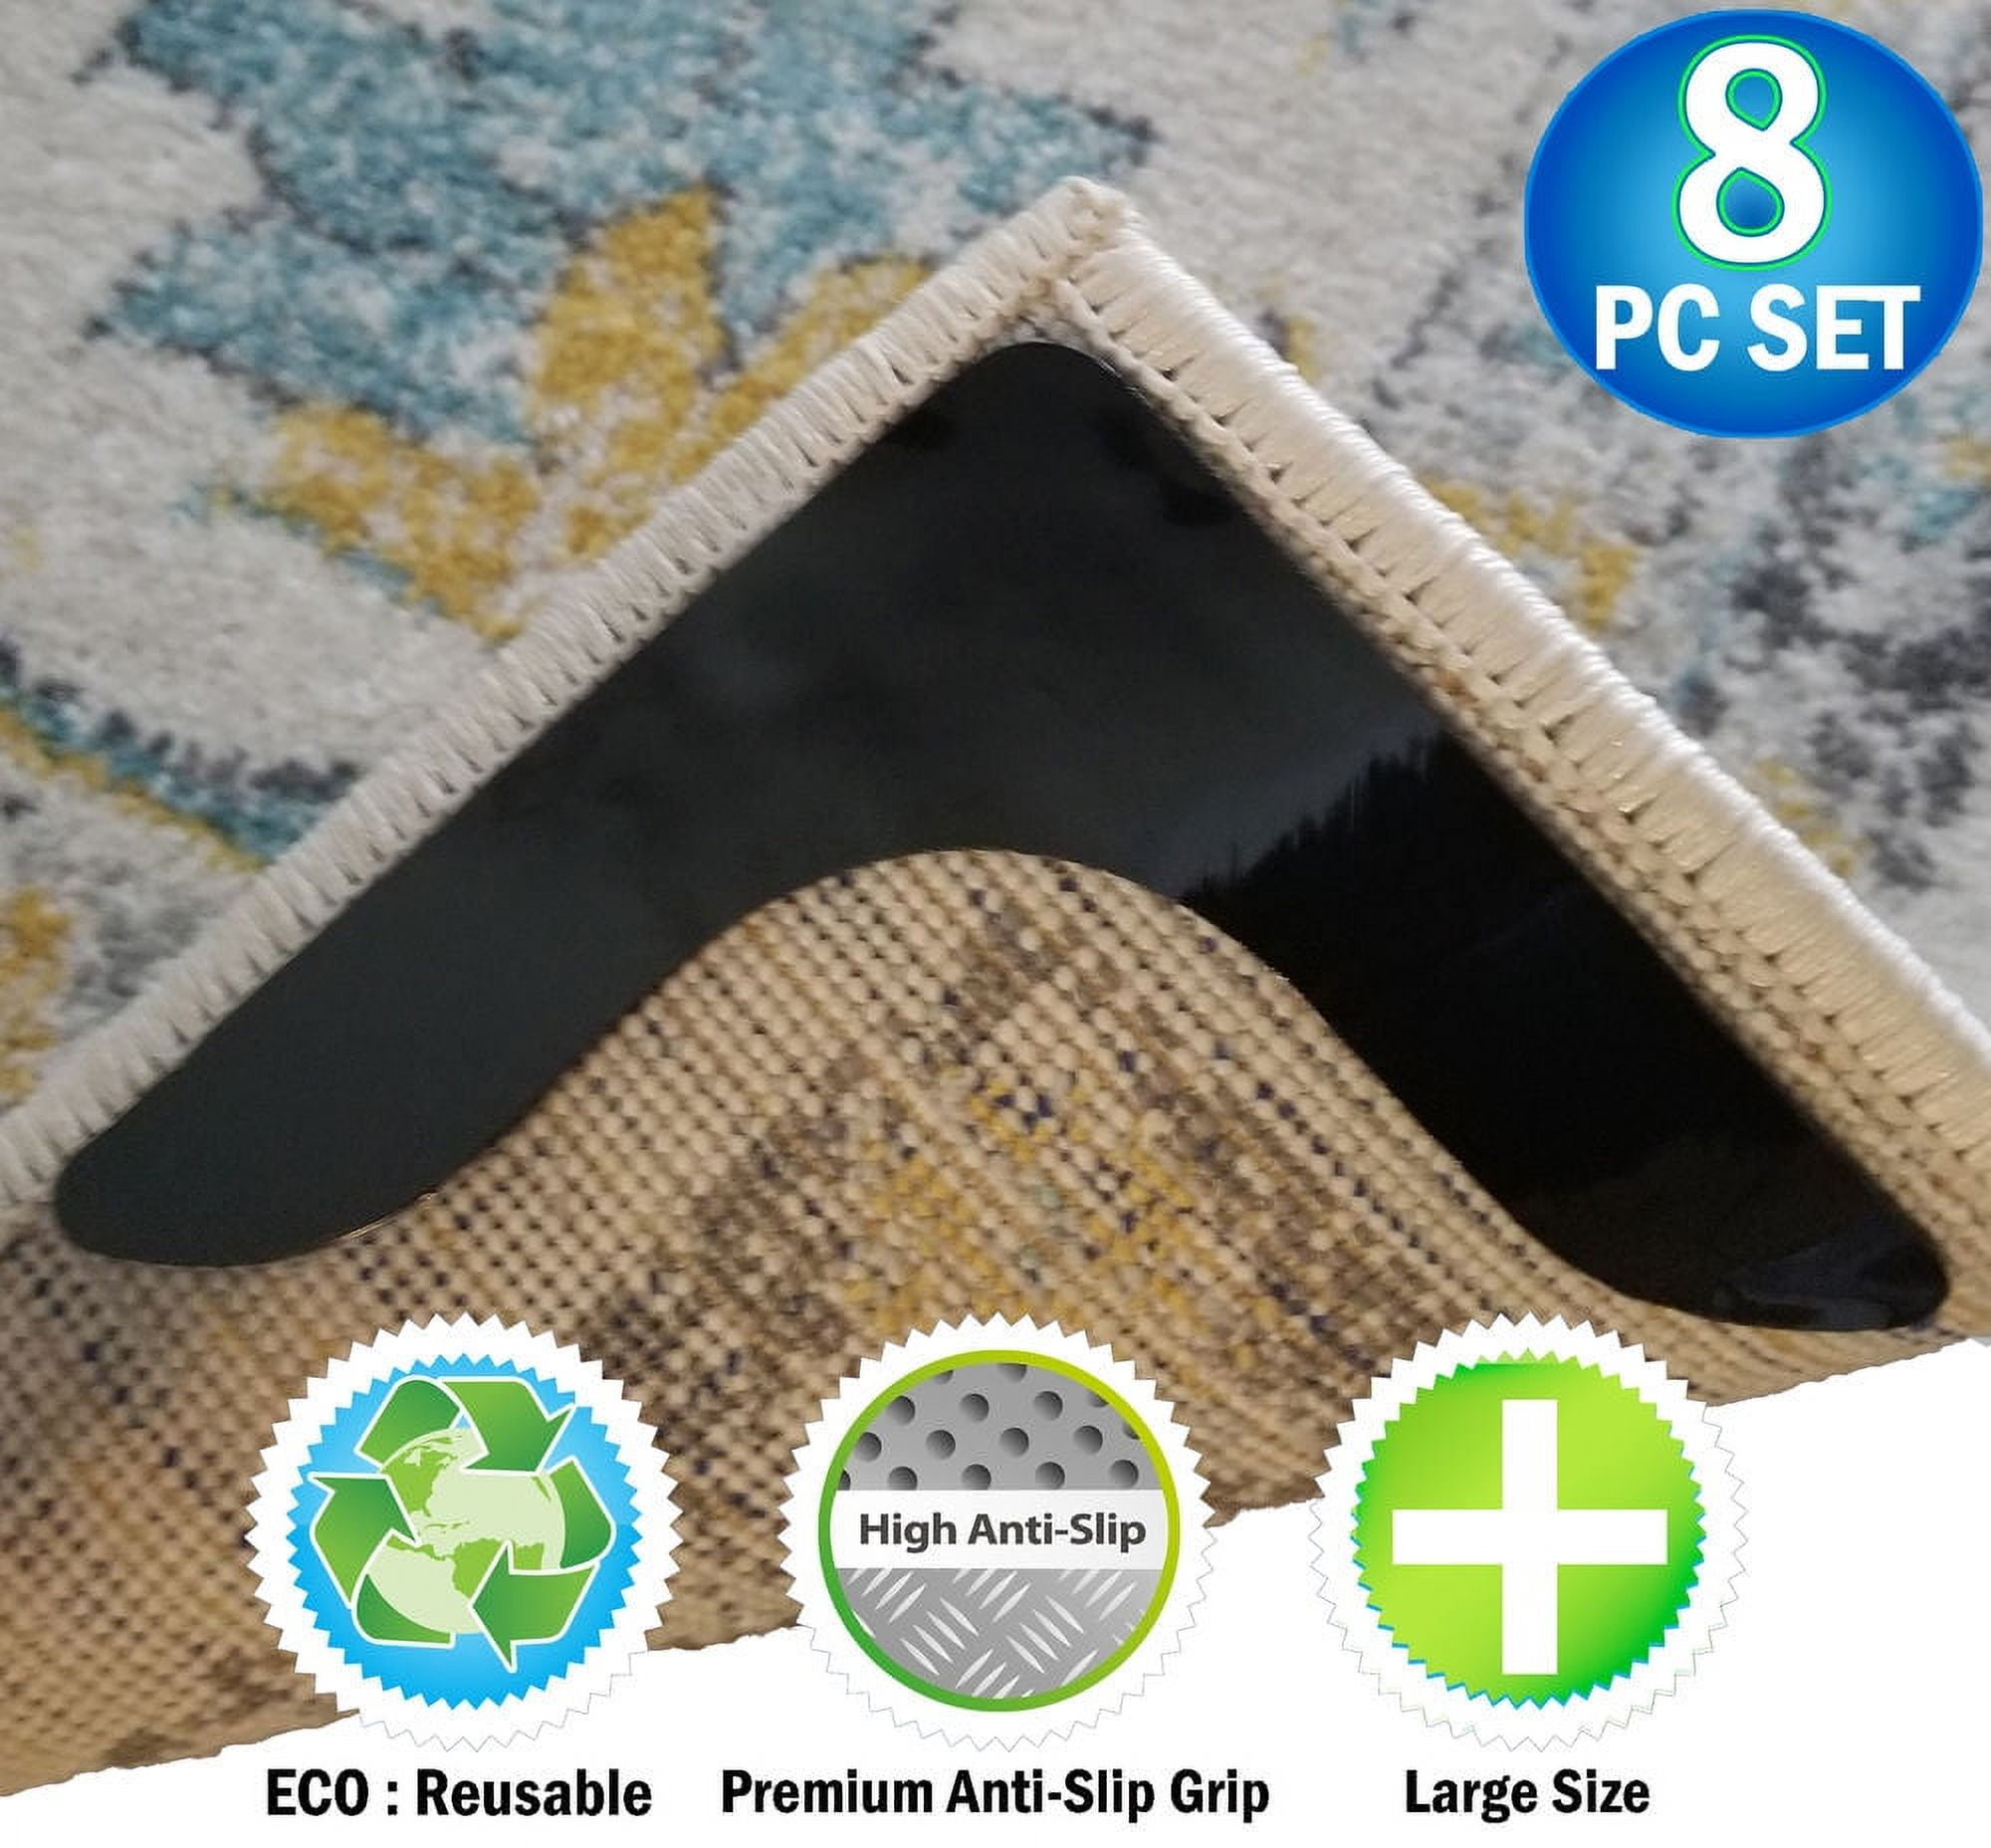 Reusable Corner Area Carpet Rug Grippers - V Shaped - Prevents Curling,  Moving, Sliding, & Slipping - Anchors Carpet To Your Floor - 8pc Set